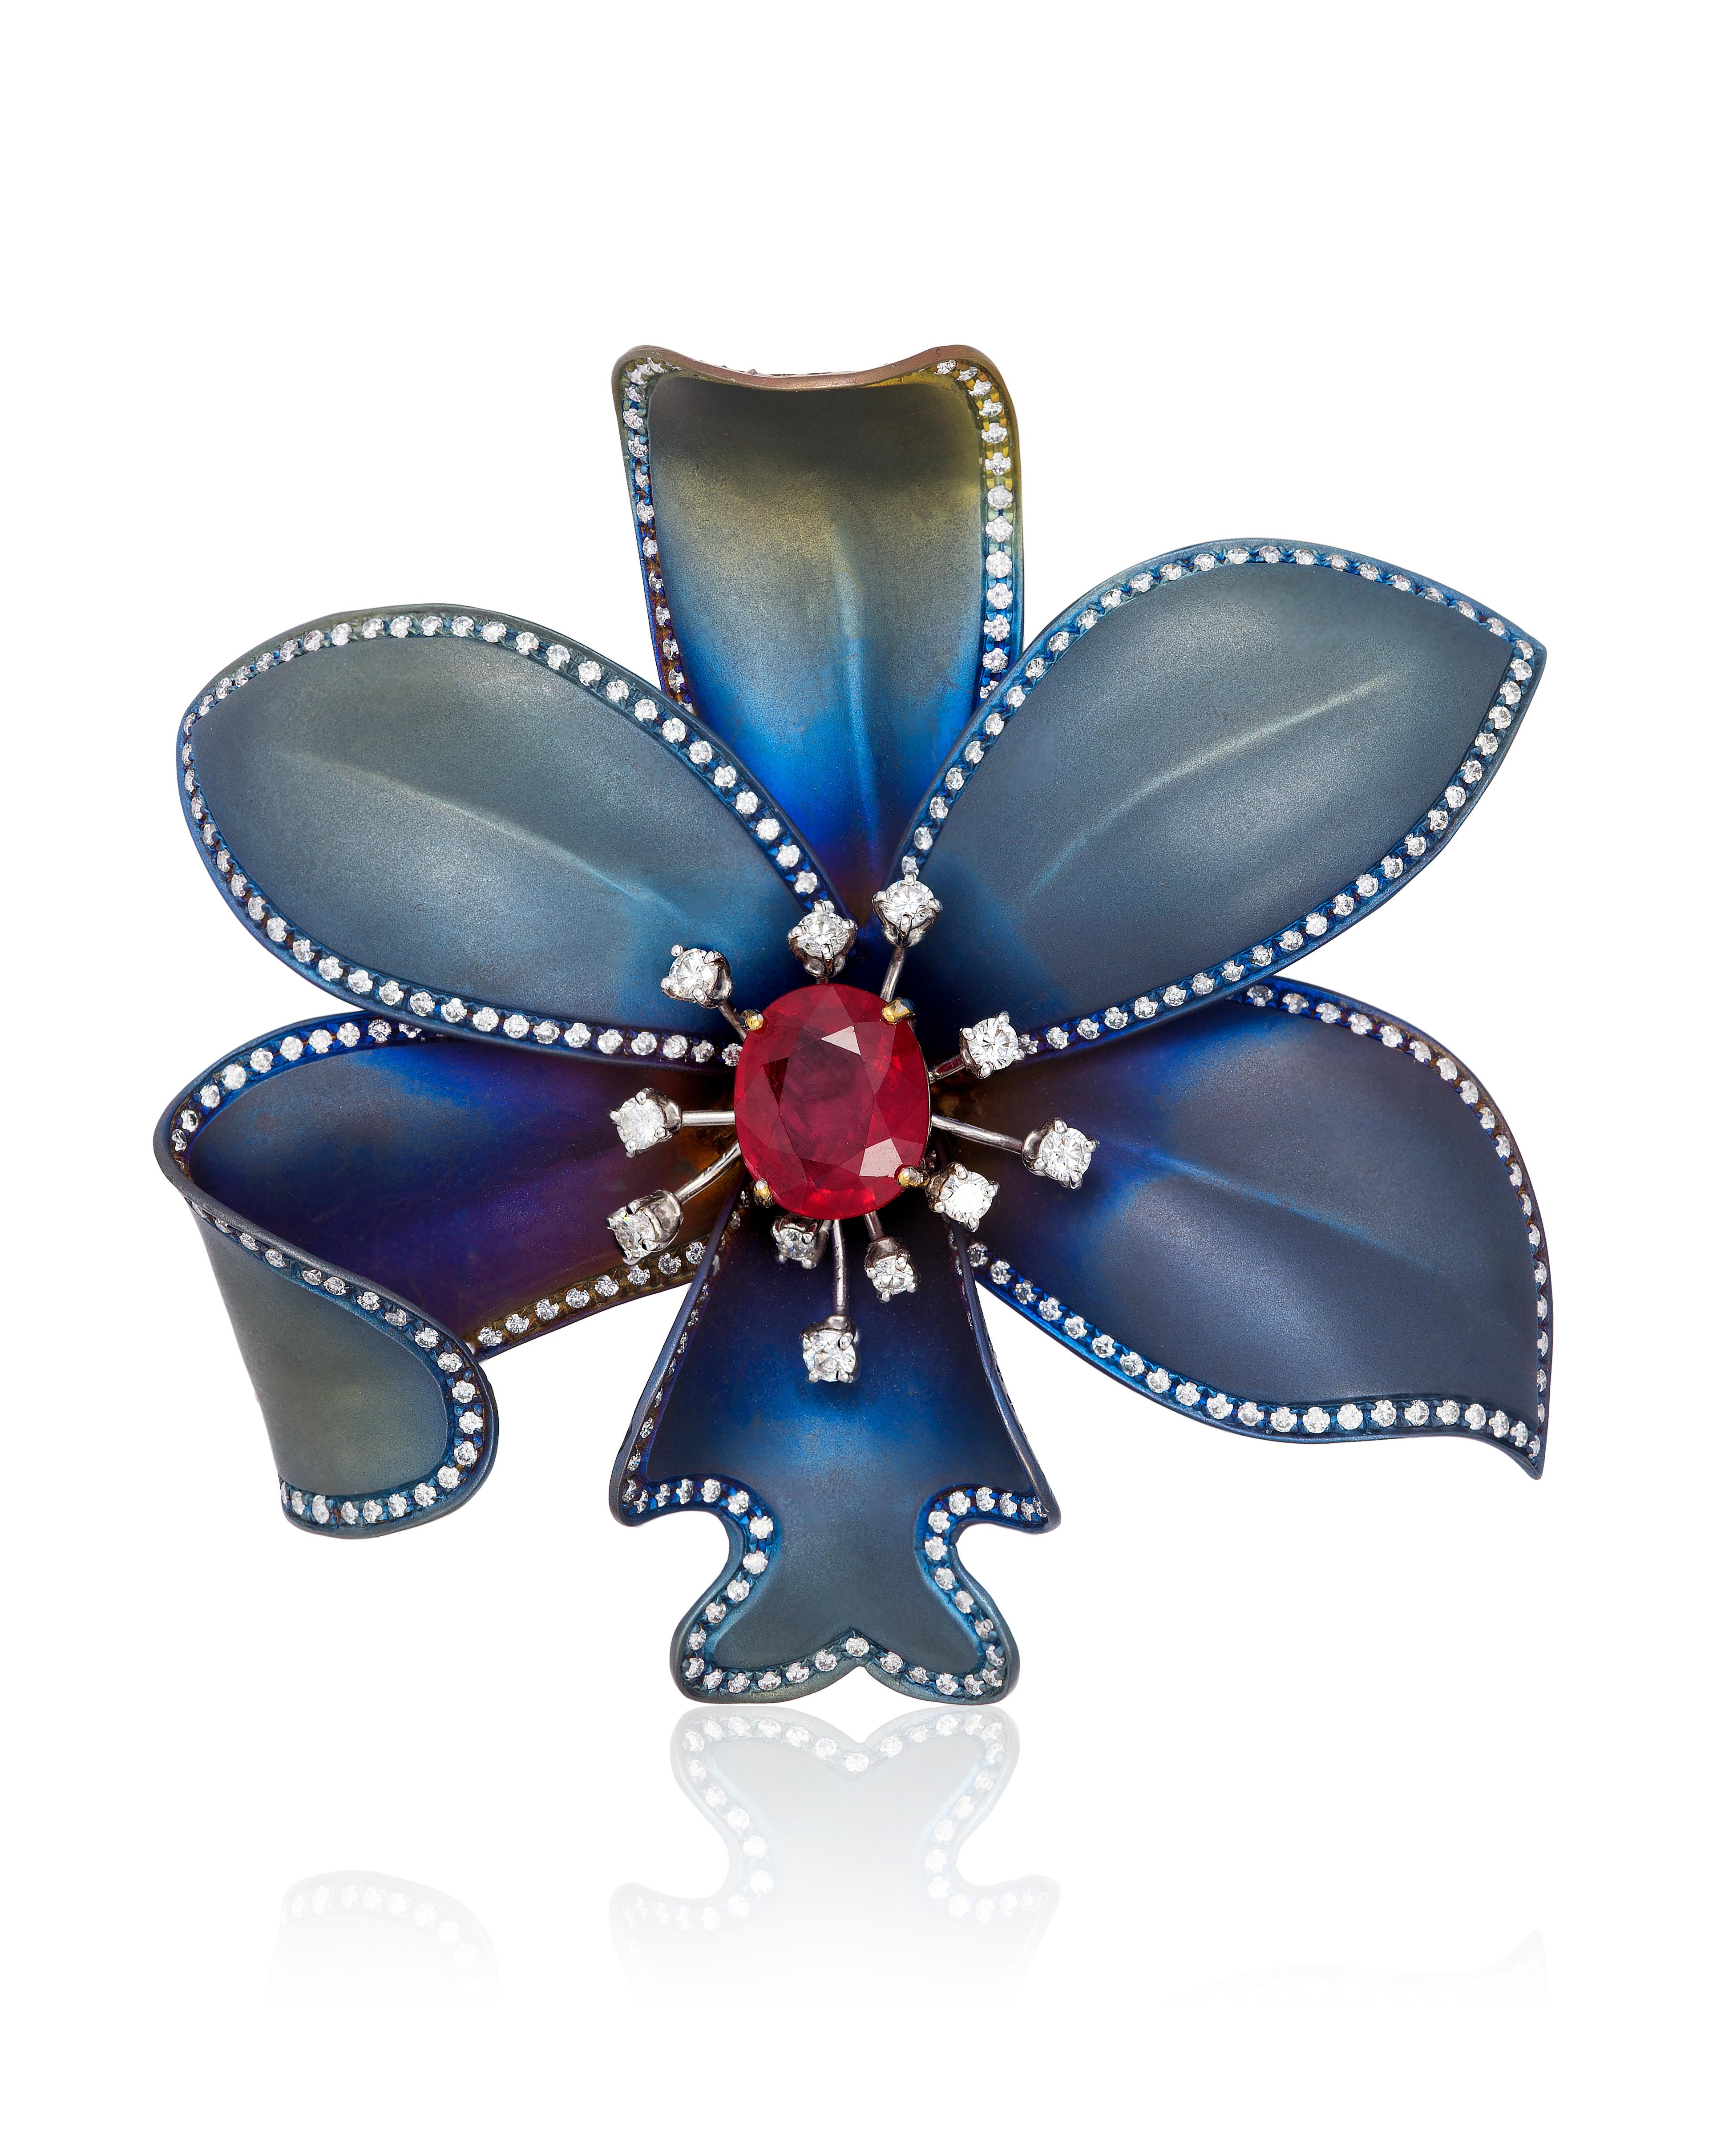 Andreoli Titanium Ruby Diamond Flower Brooch Pin . Andreoli was one of the first jewelry creators to utilize titanium in high jewelry over 18KT or Platinum. The use of titanium allows for bigger and bolder designs without compromising on the weight